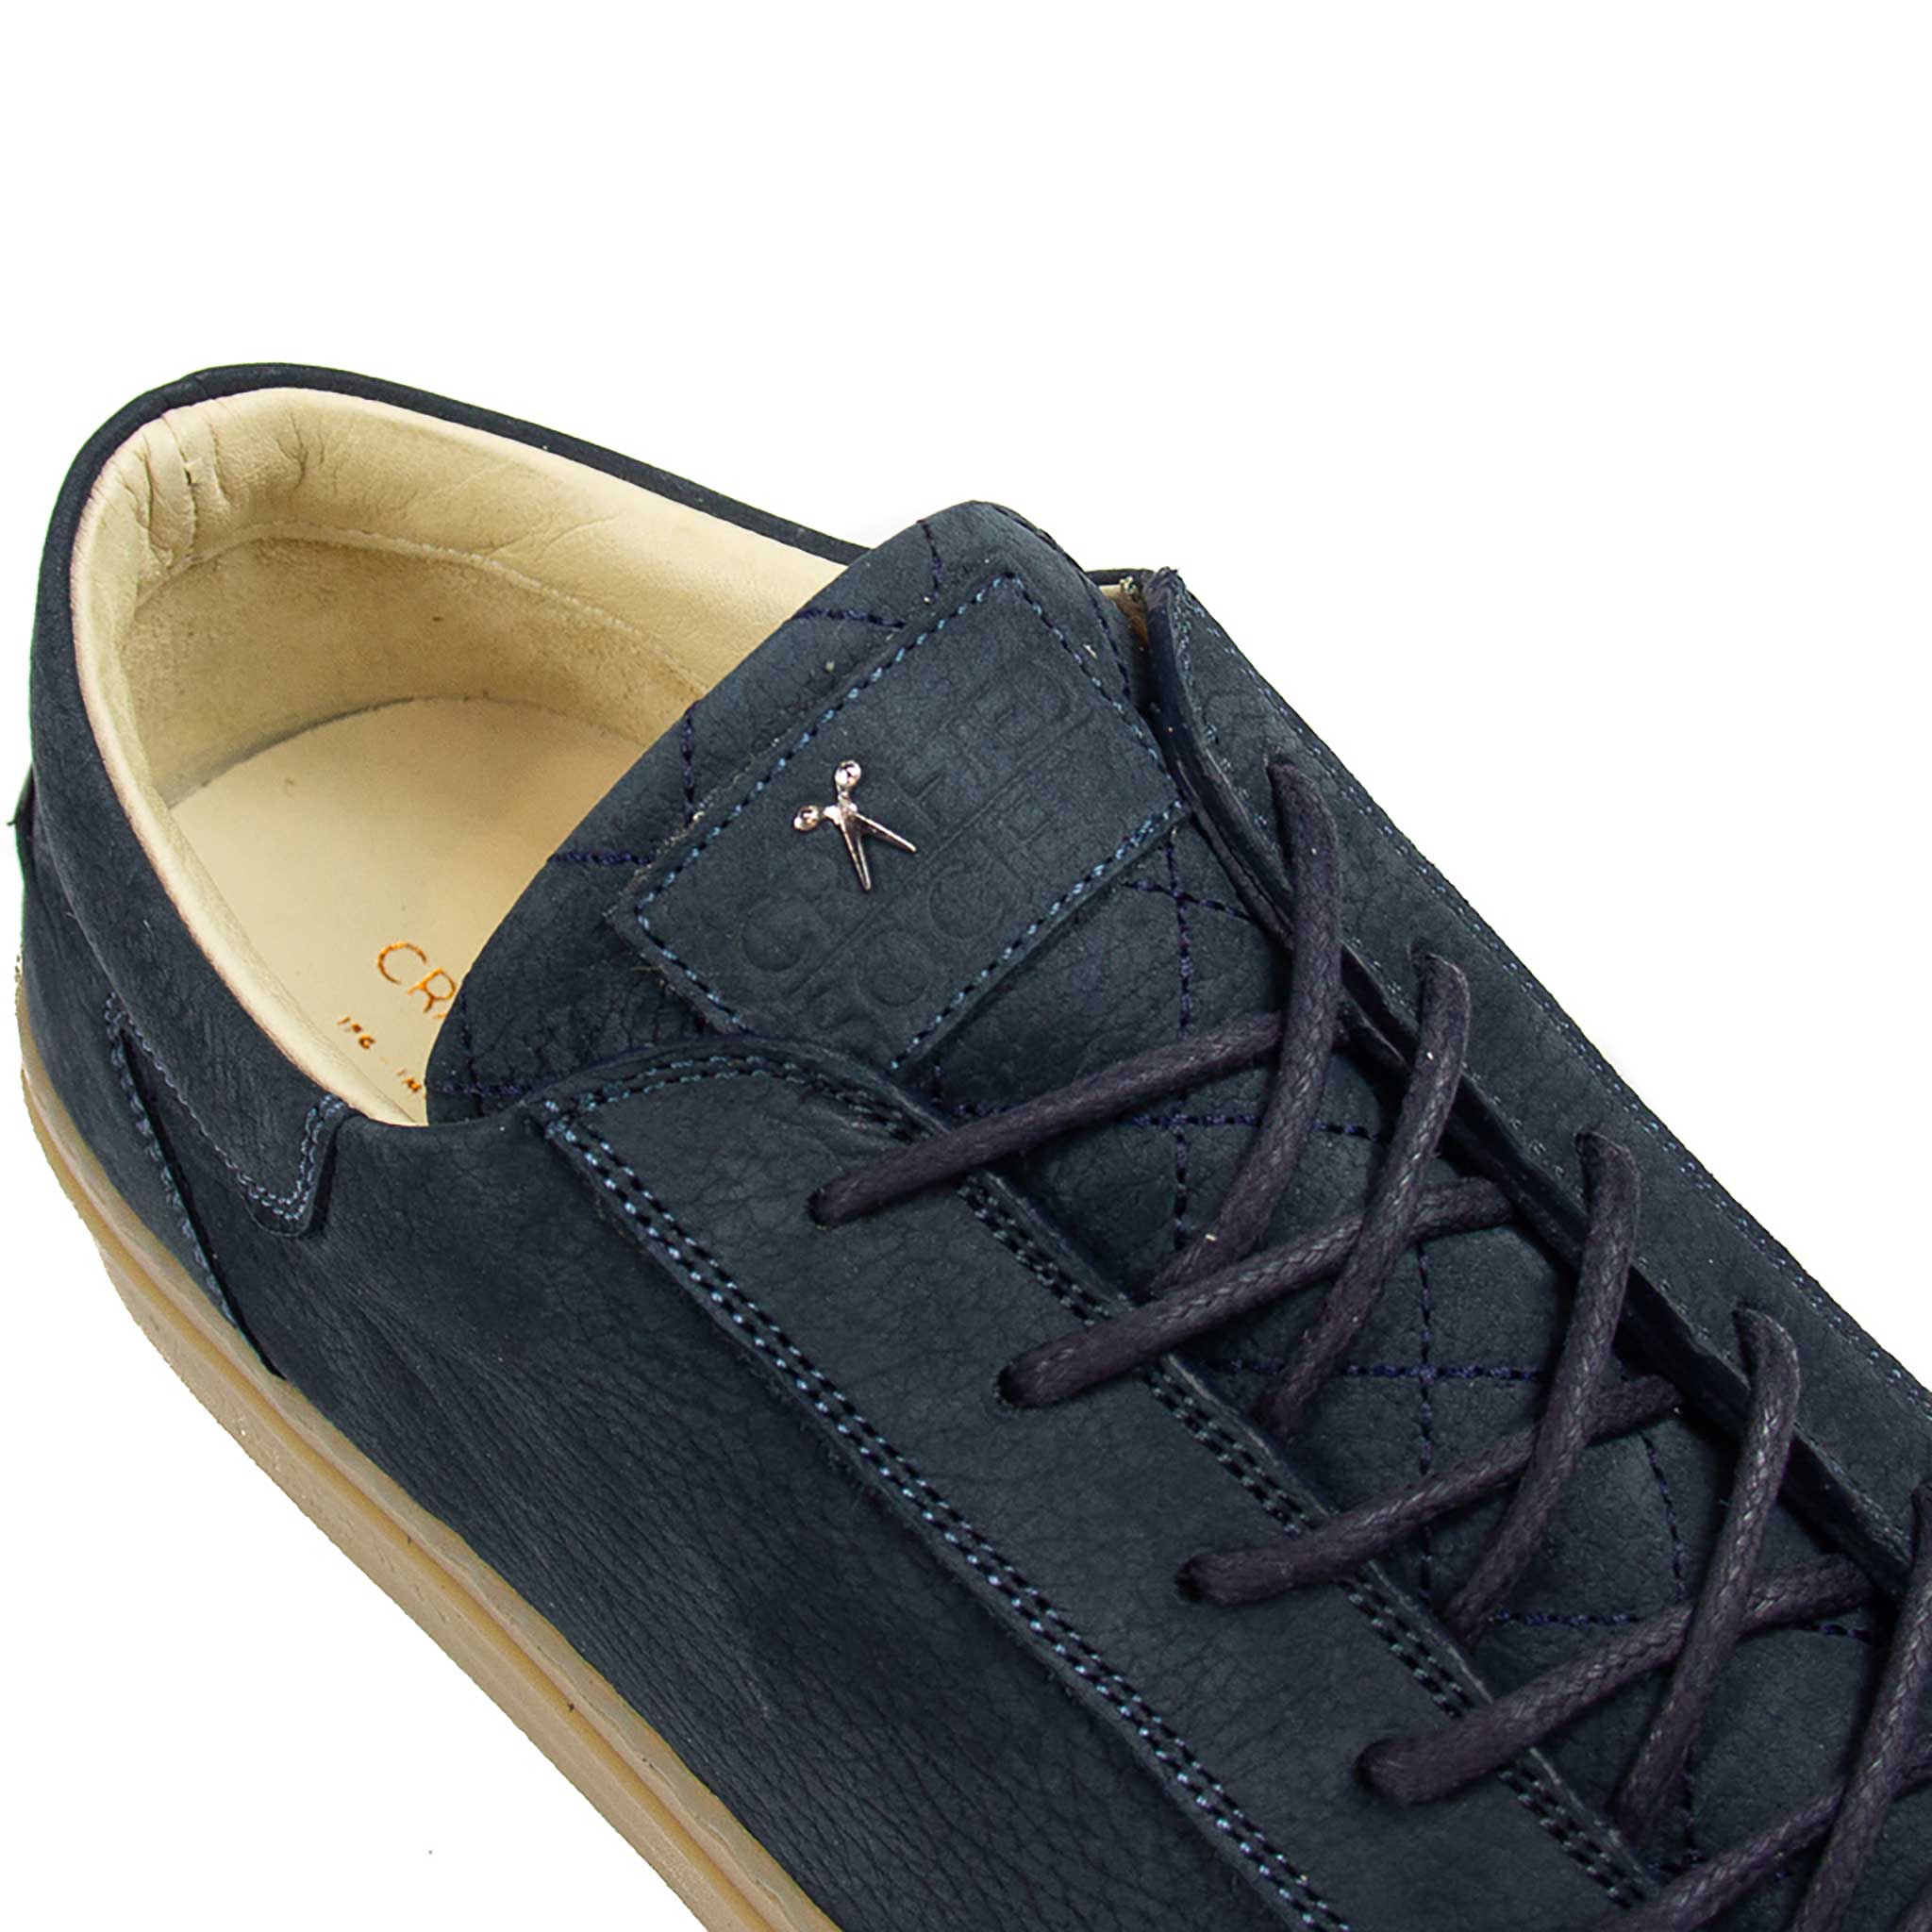 Mario Low Refined Sneaker | Navy Nubuck | Gum Rubber Outsole | Made in Italy | Sizes 38, 39, 41 & 43